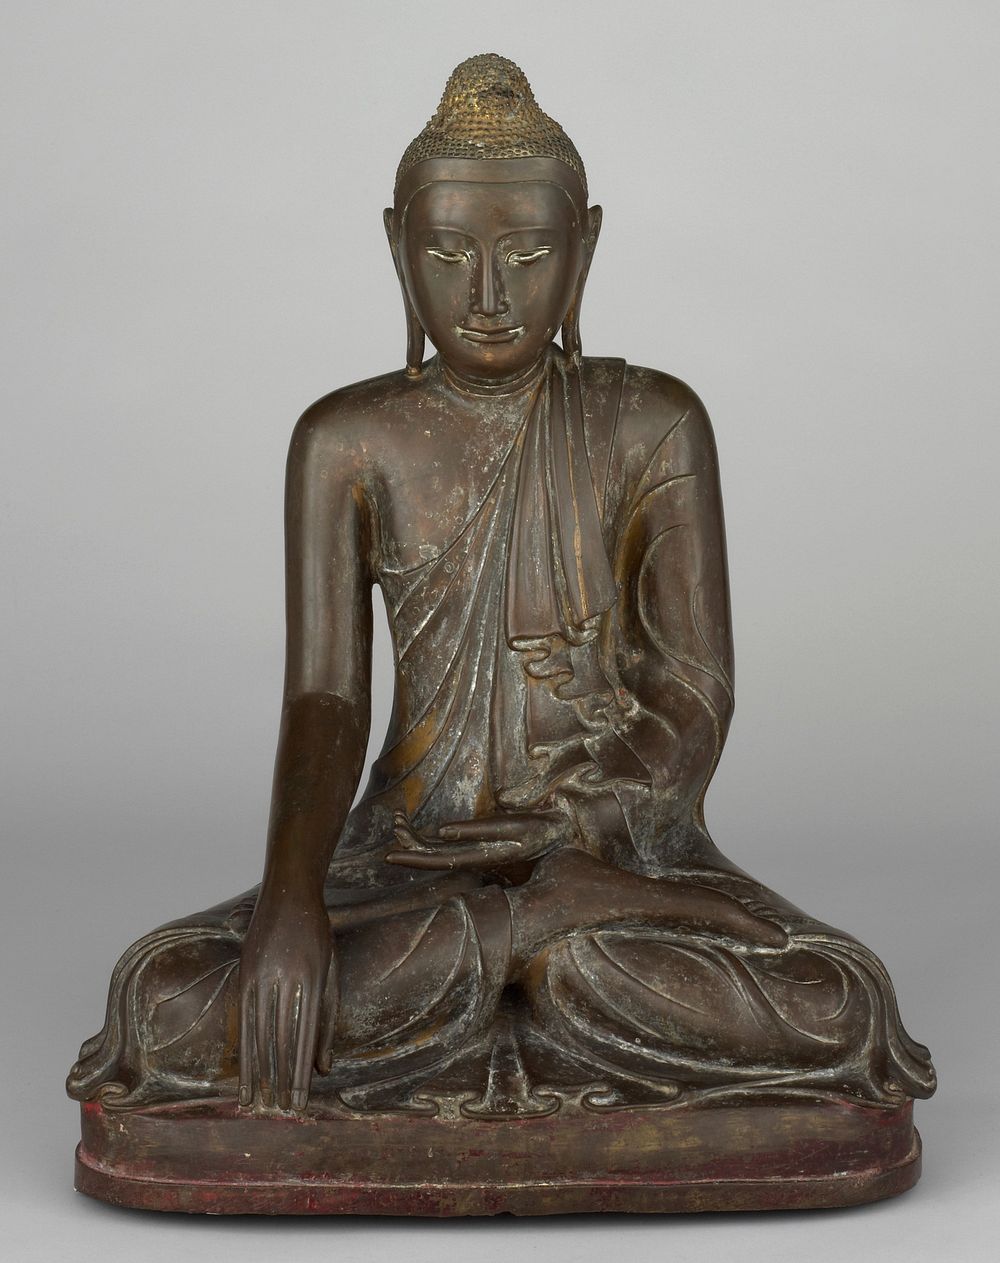 Mandalay style; Buddha seated in the bhumisparsamudra pose, his left hand is held in his lap and his right hand touches the…